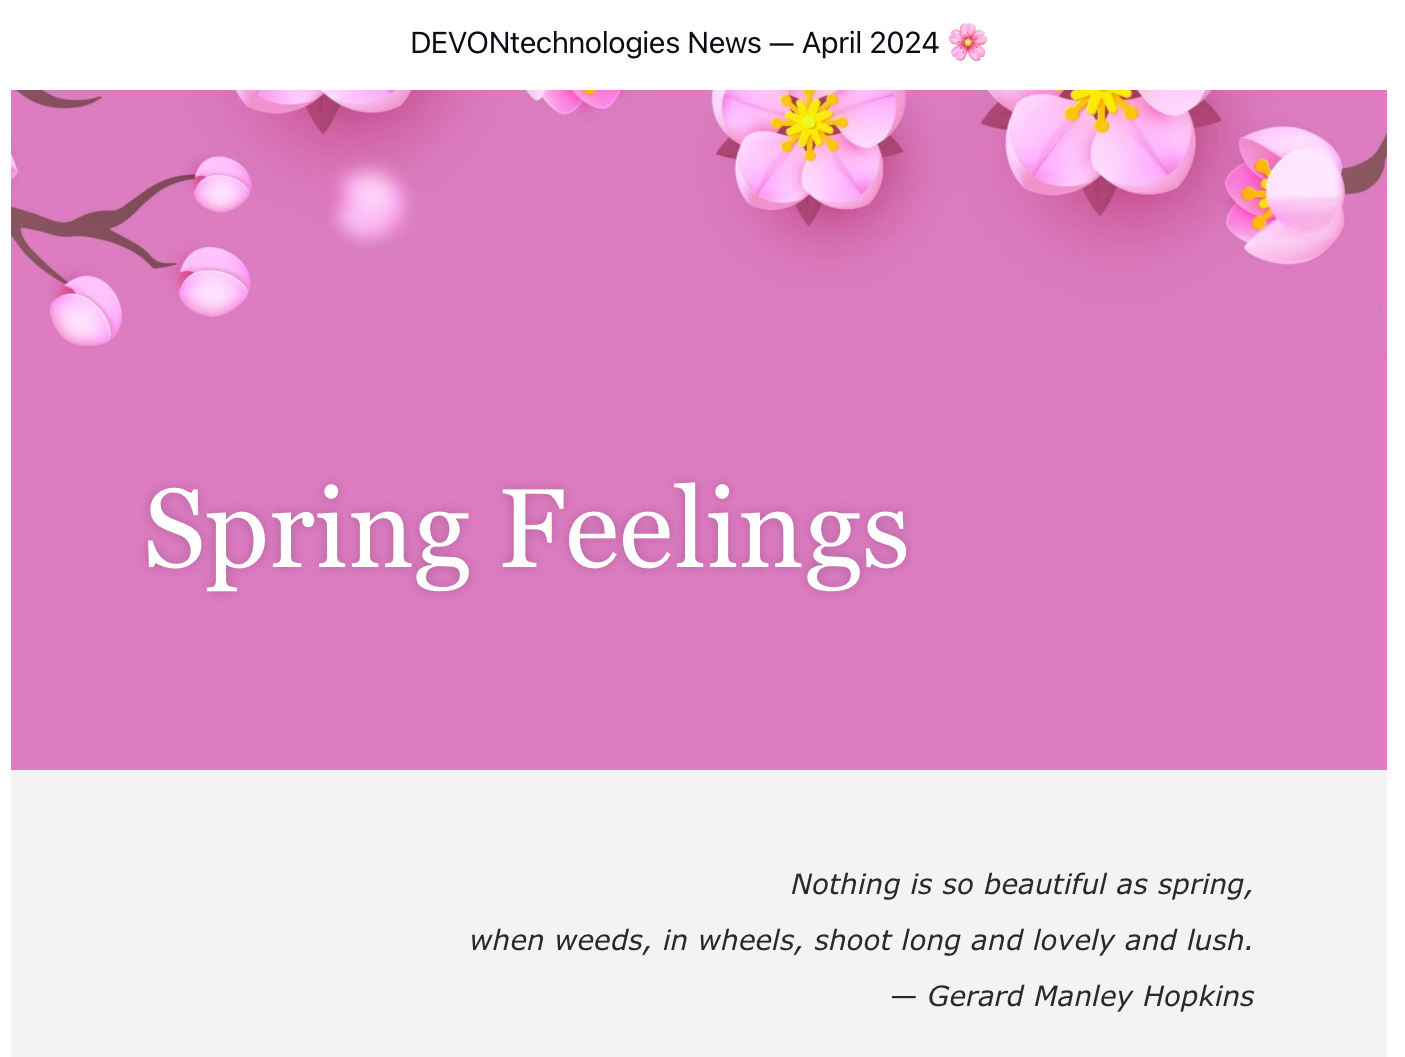 Screenshot of the April 2024 DEVONTechnologies Newsletter, featuring a poetic verse: Nothing is so beautiful as spring, when weeds, in wheels, shoot long and lovely and lush. — Gerard Manley Hopkins